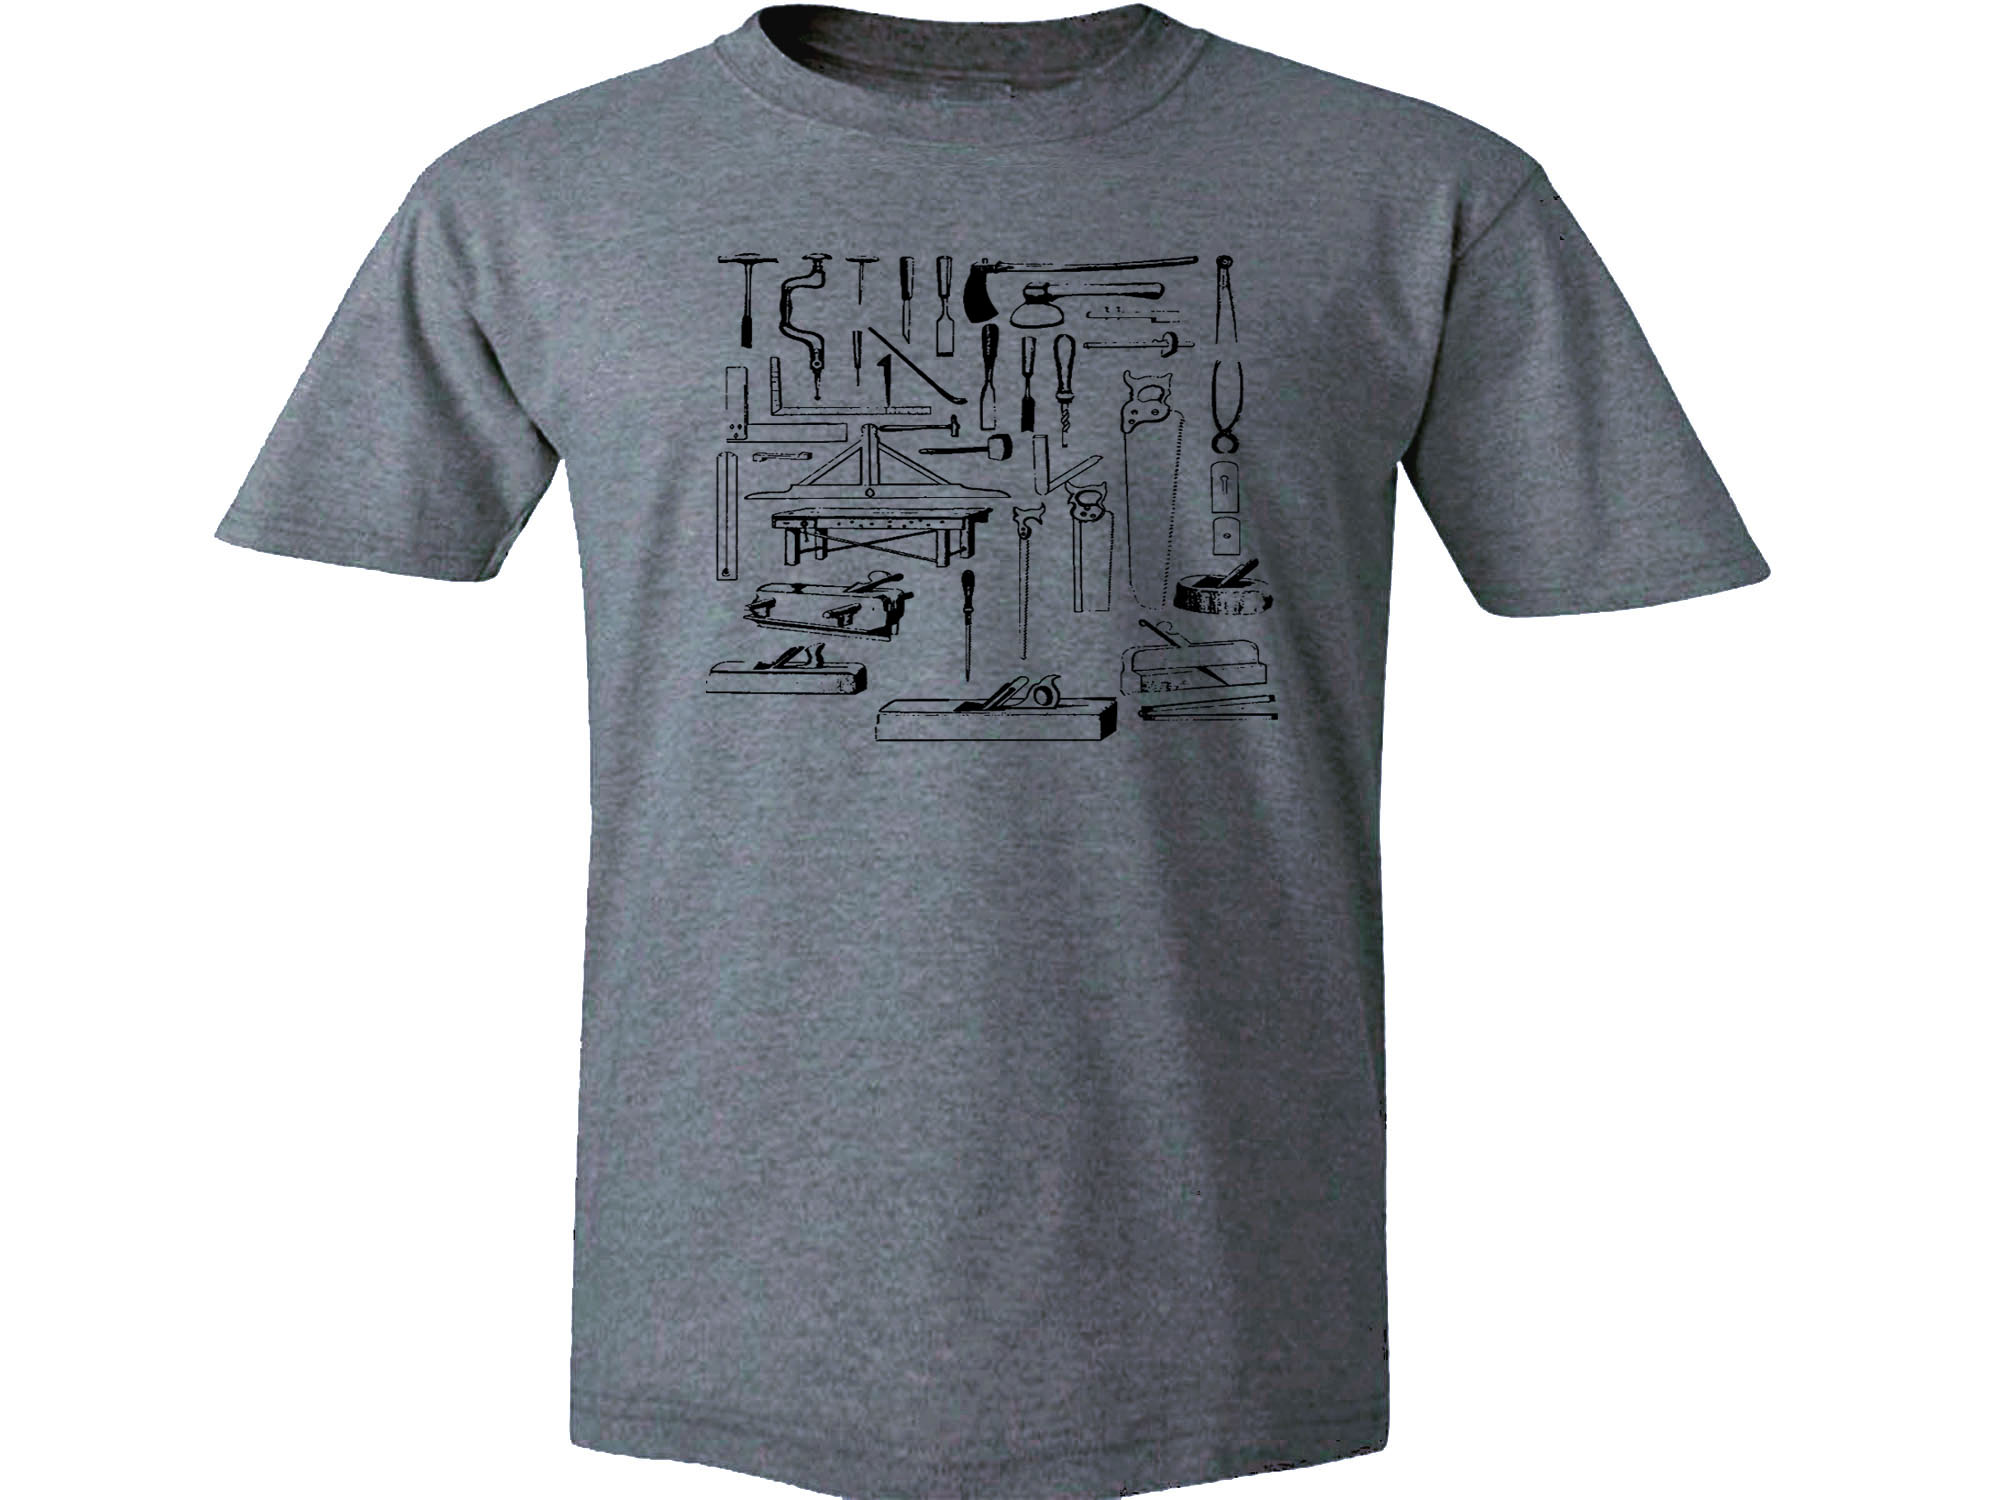 Woodworking wood worker tools carpentry gray t-shirt great gift for him